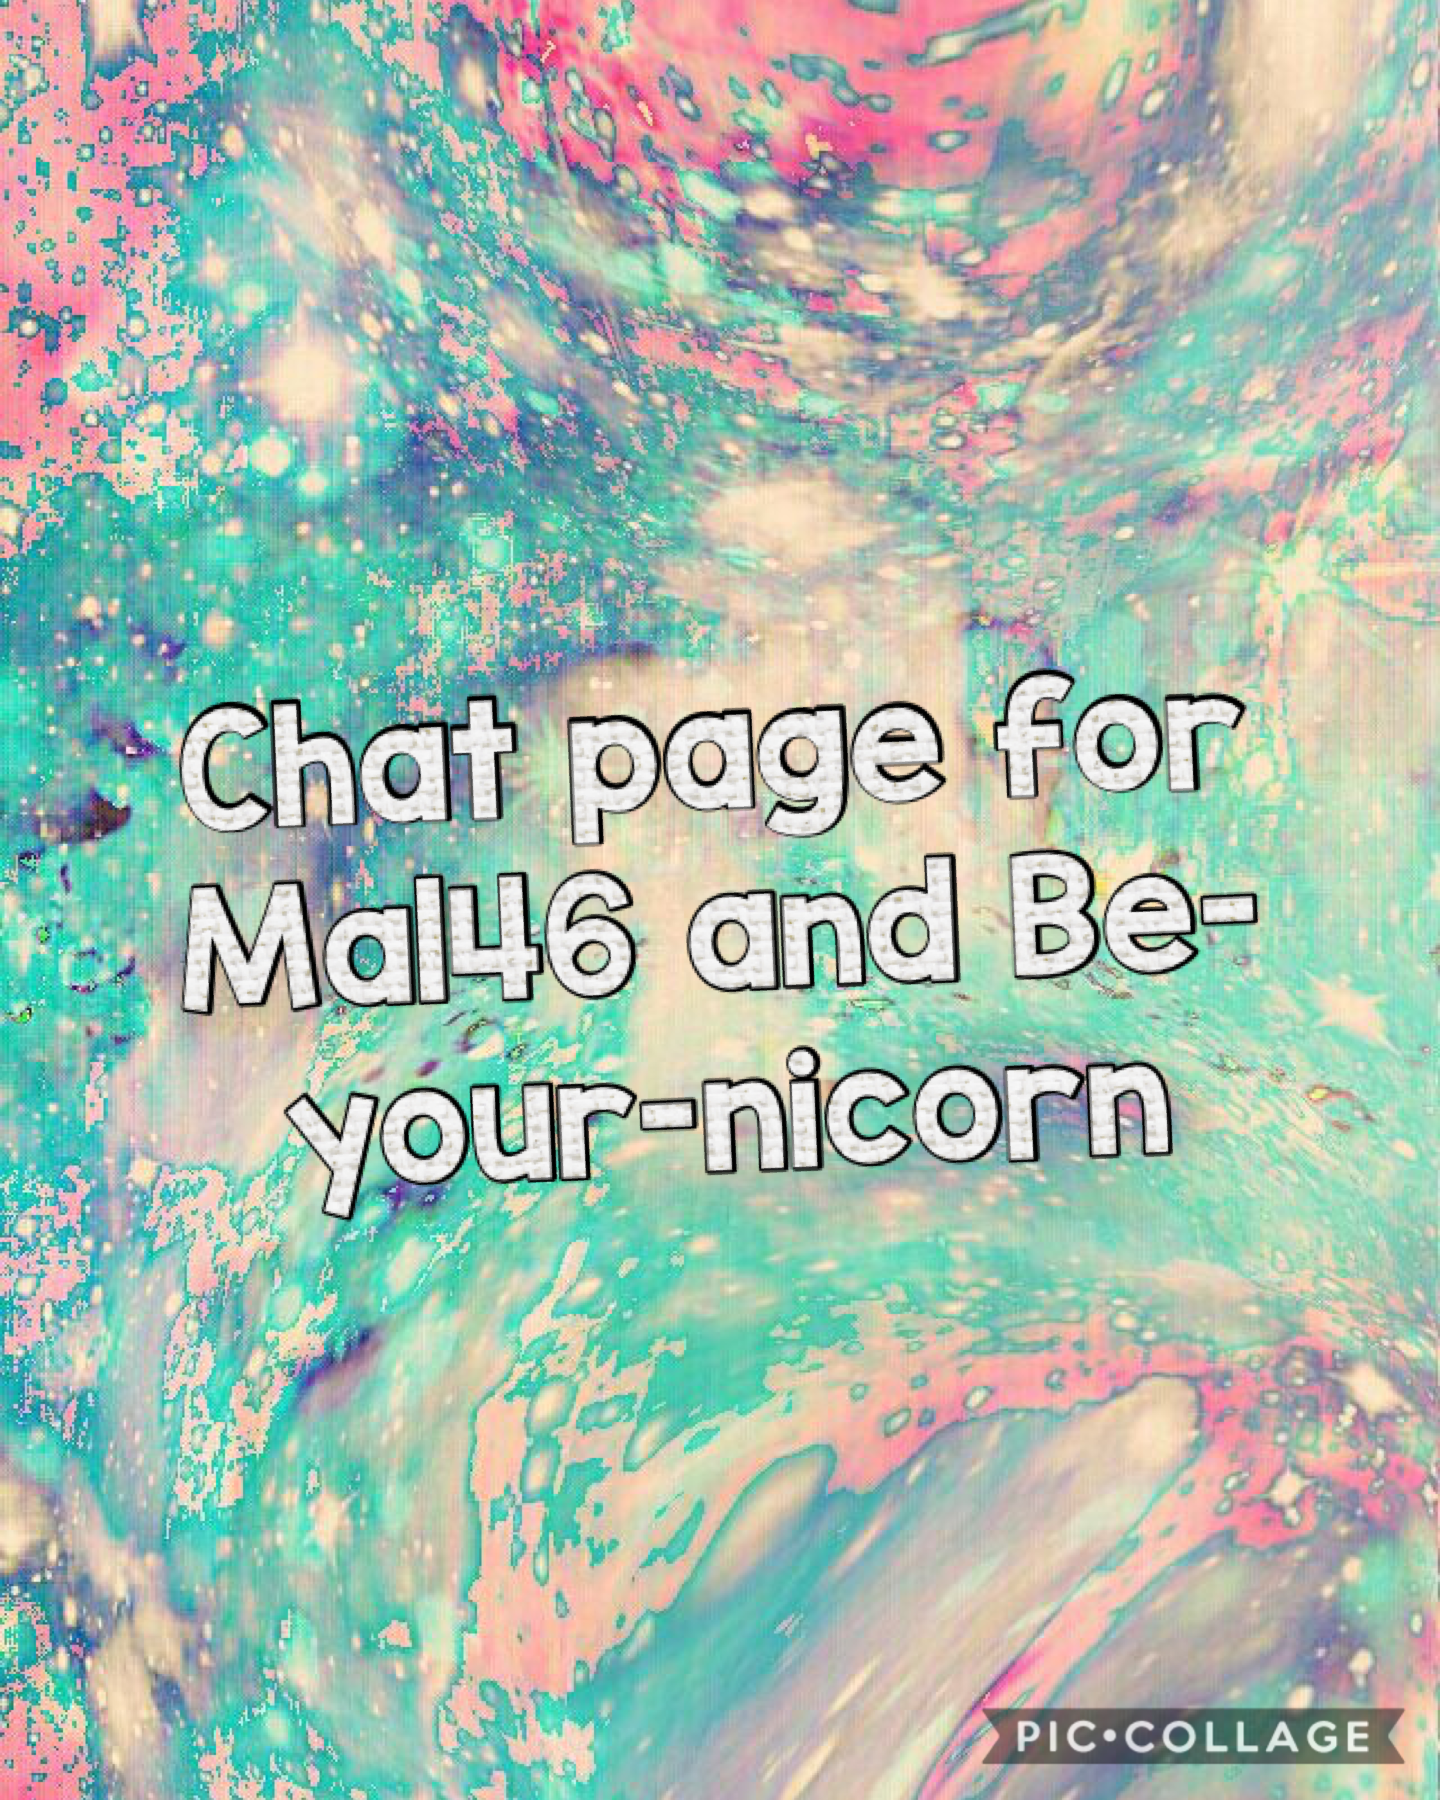 Chat page with be-your-nicorn